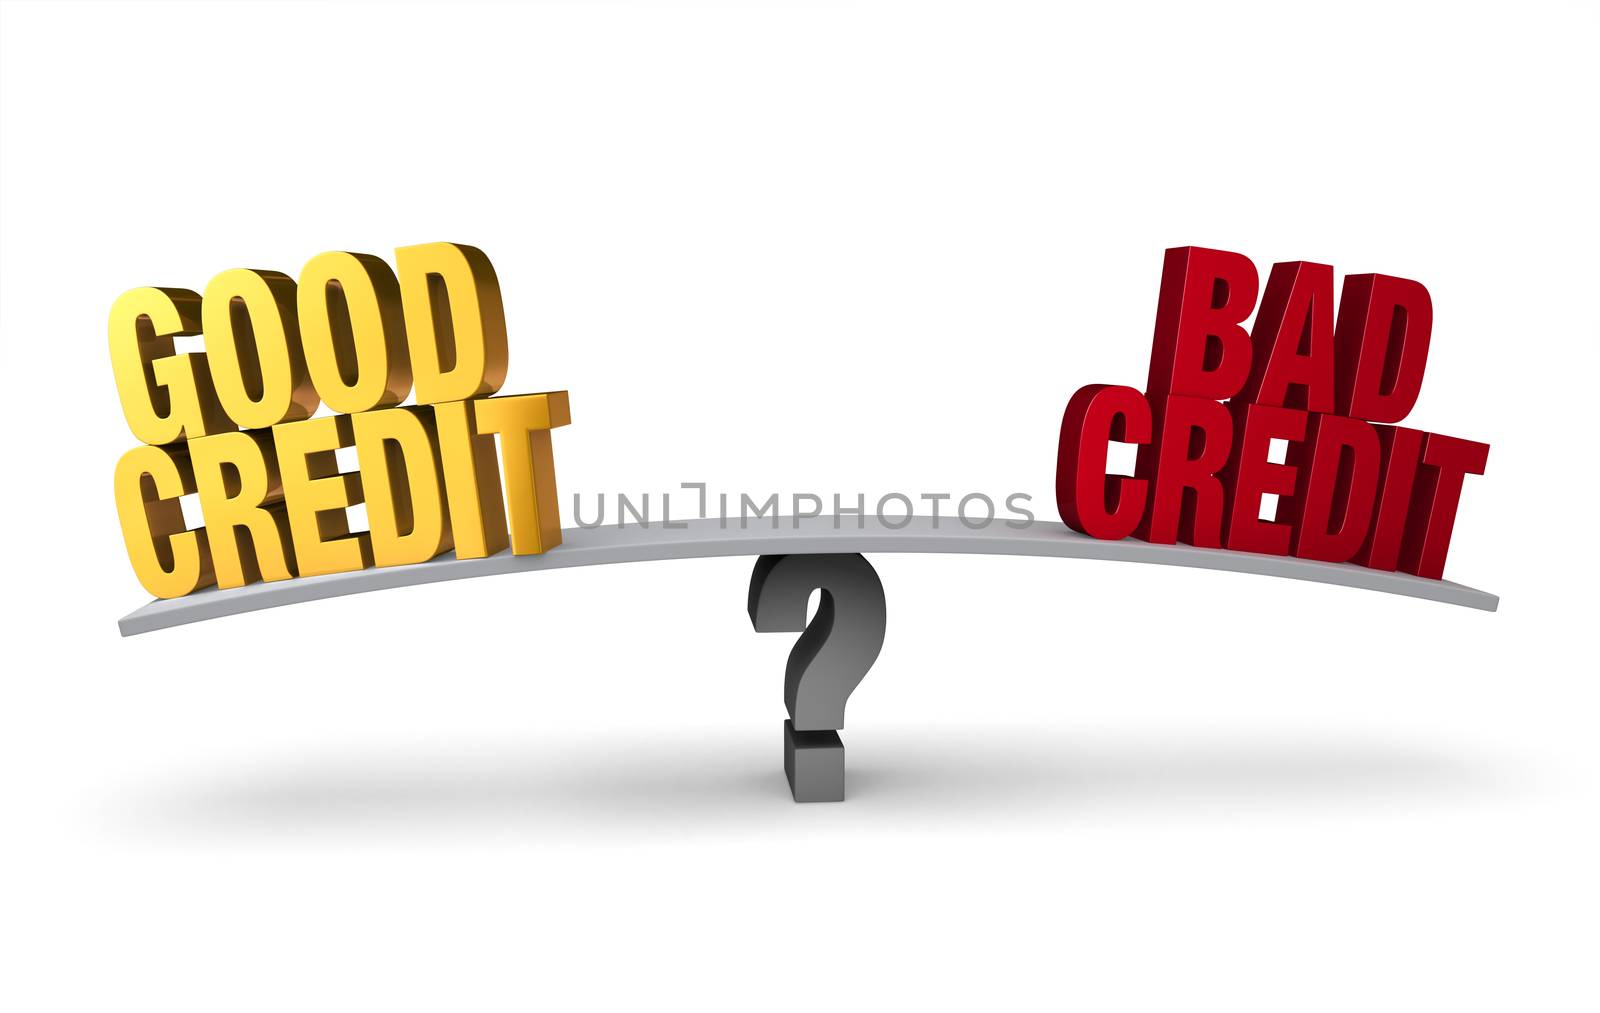 Bright, gold "GOOD CREDIT" and red "BAD CREDIT" sit on opposite ends of a gray board which is balanced on a gray question mark. Isolated on white.